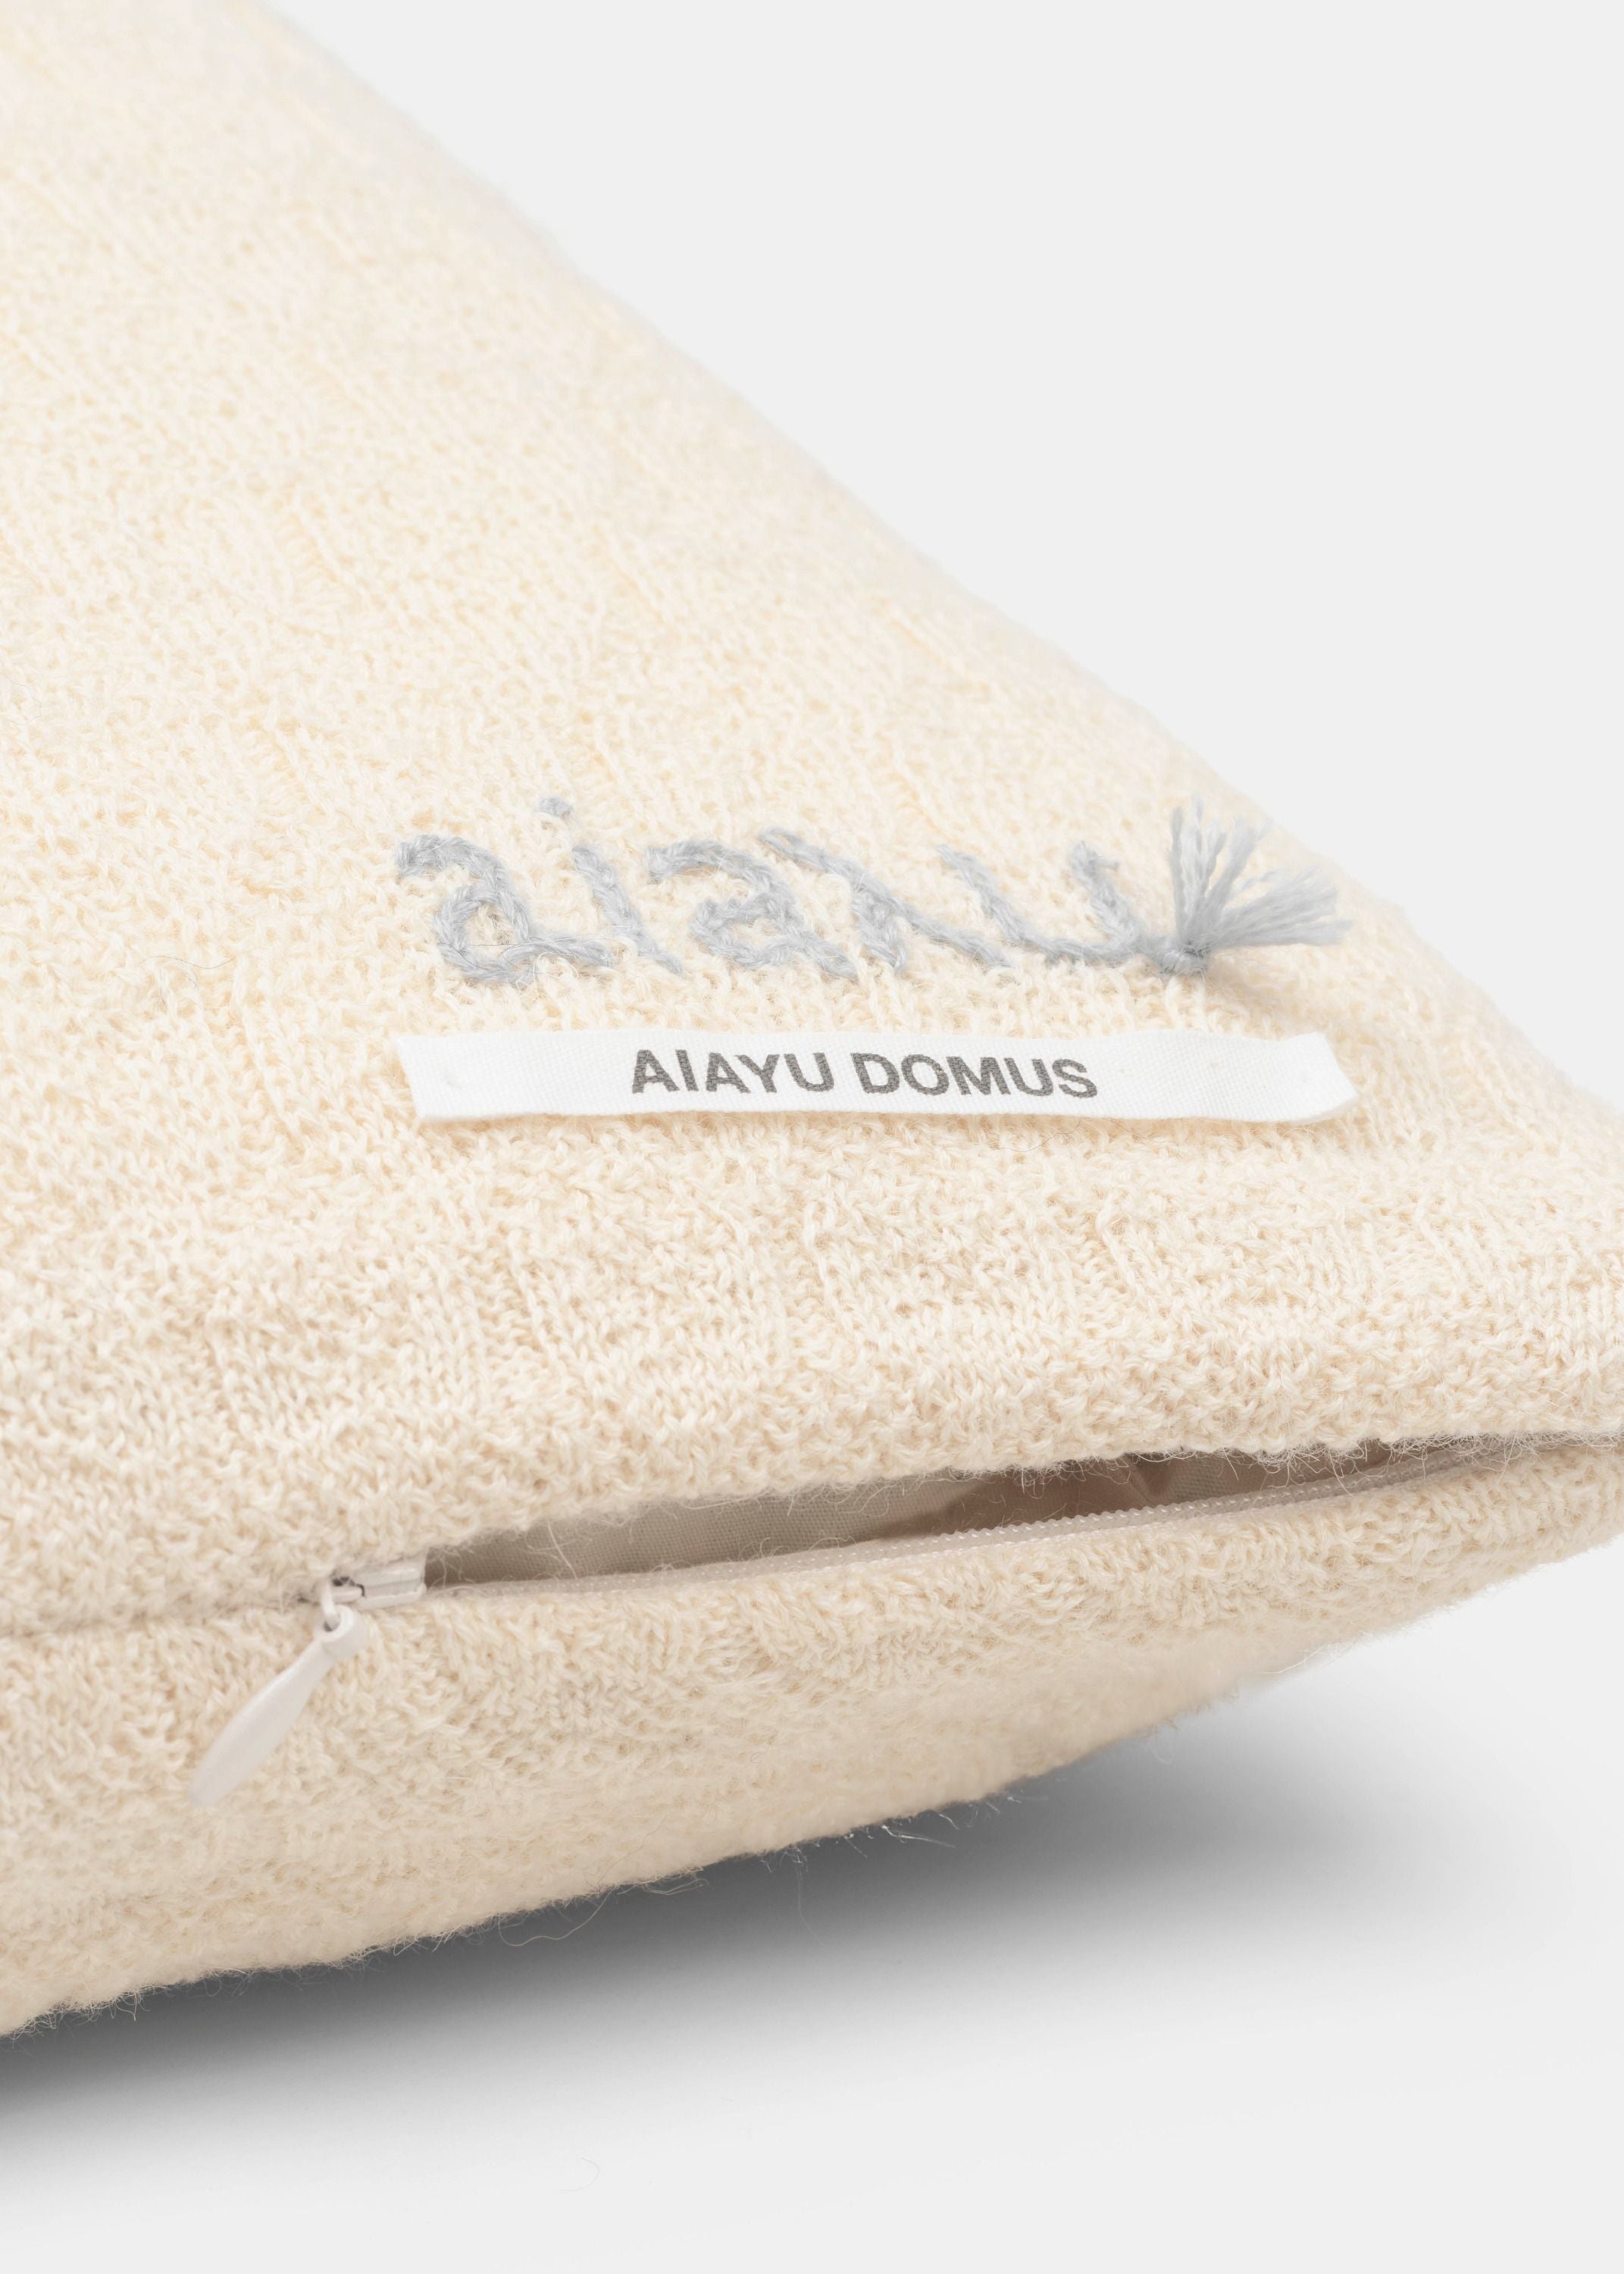 Raul Classic Pillow 50 x 50 / Albicant